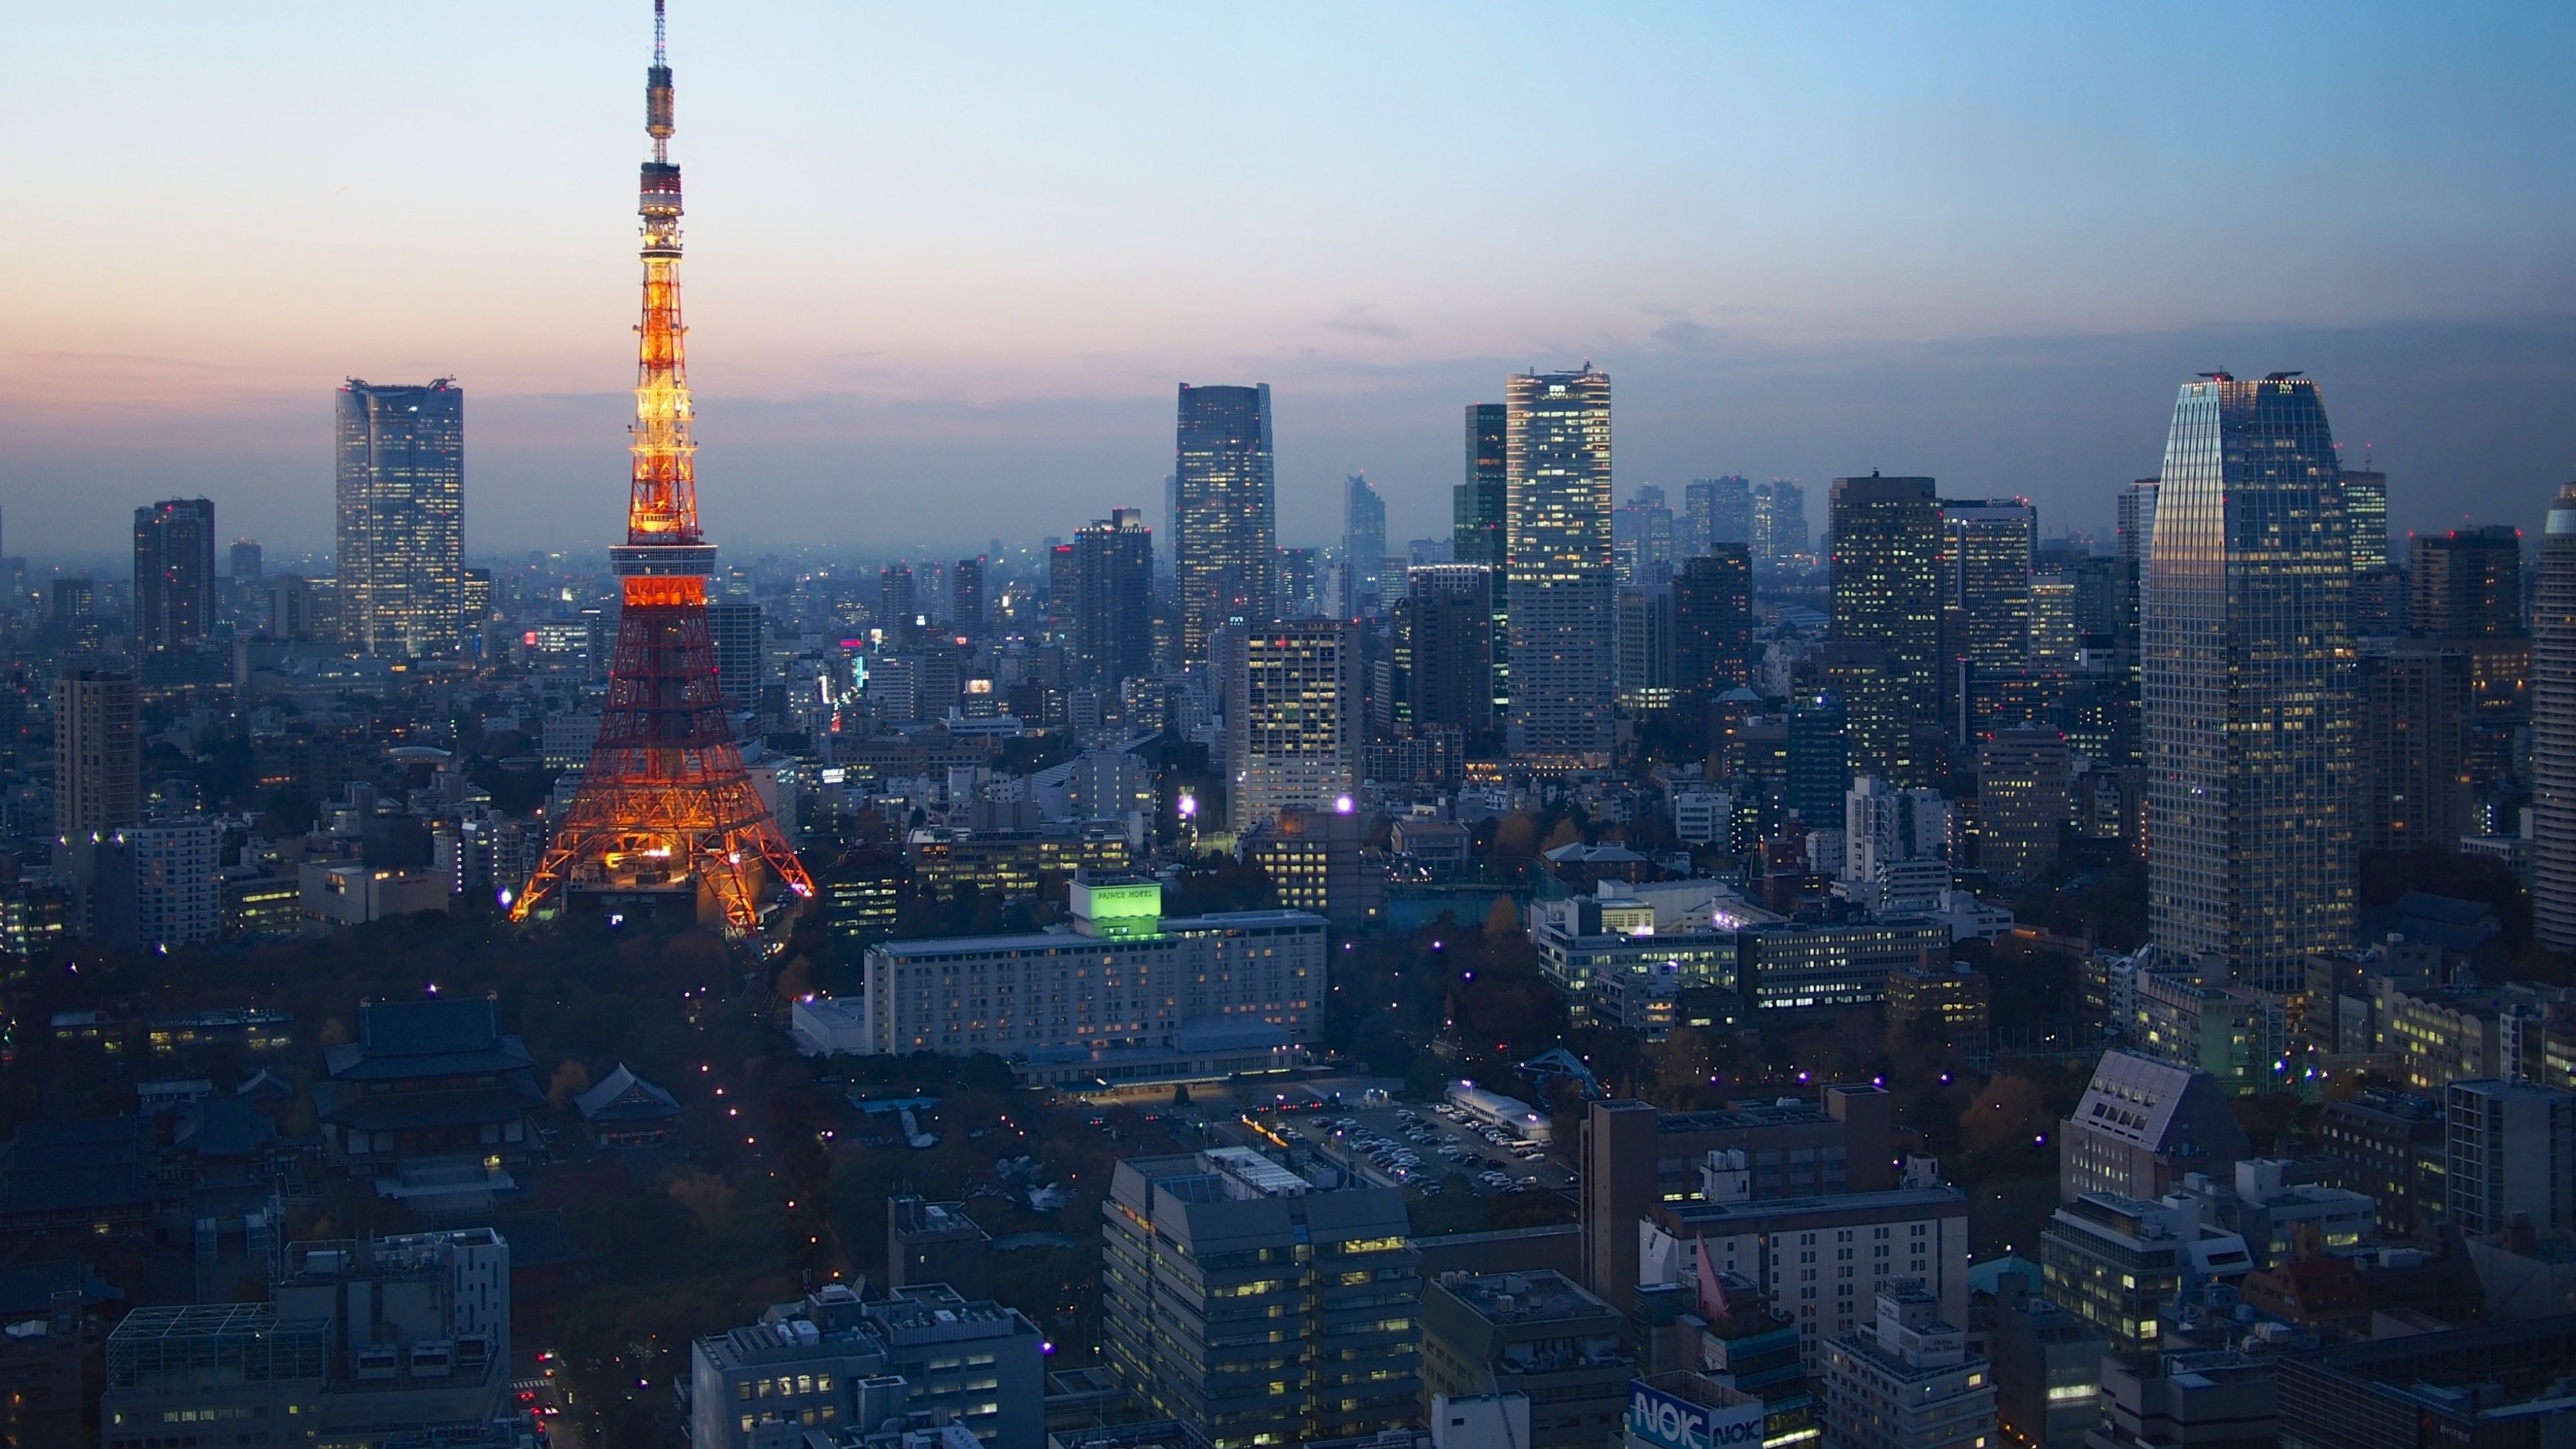 A night view of Tokyo Tower, one of the most famous landmarks in the city. - Tokyo